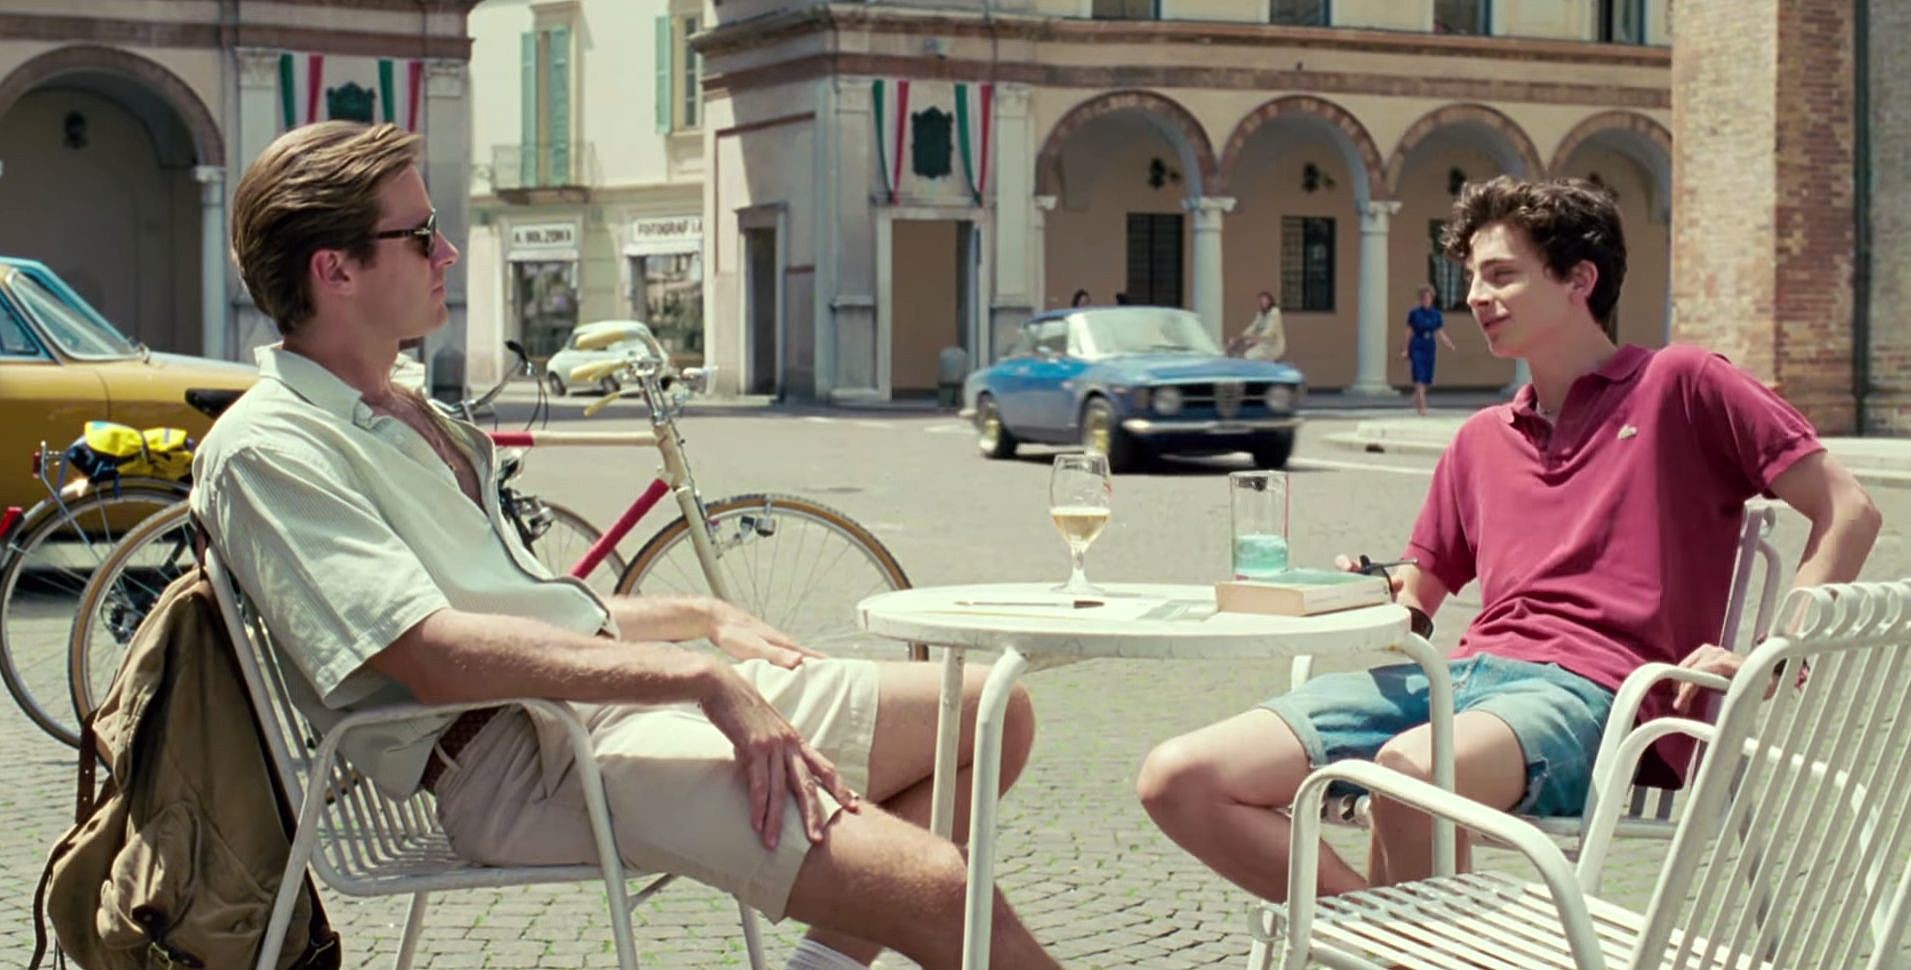 visit call me by your name locations